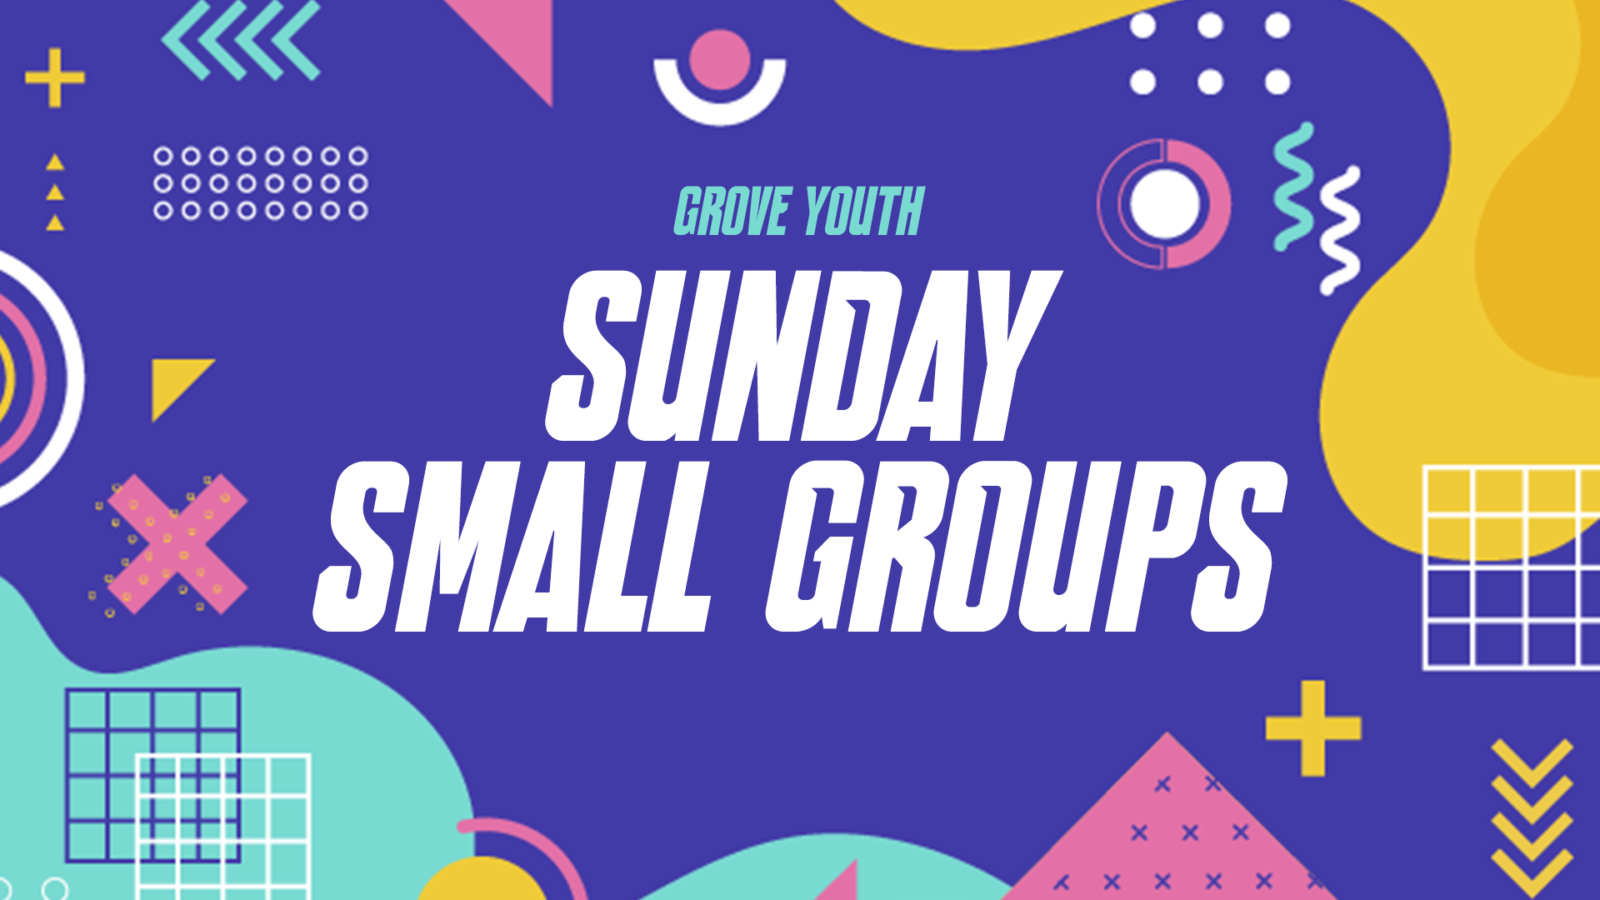 Grove Youth Small Groups